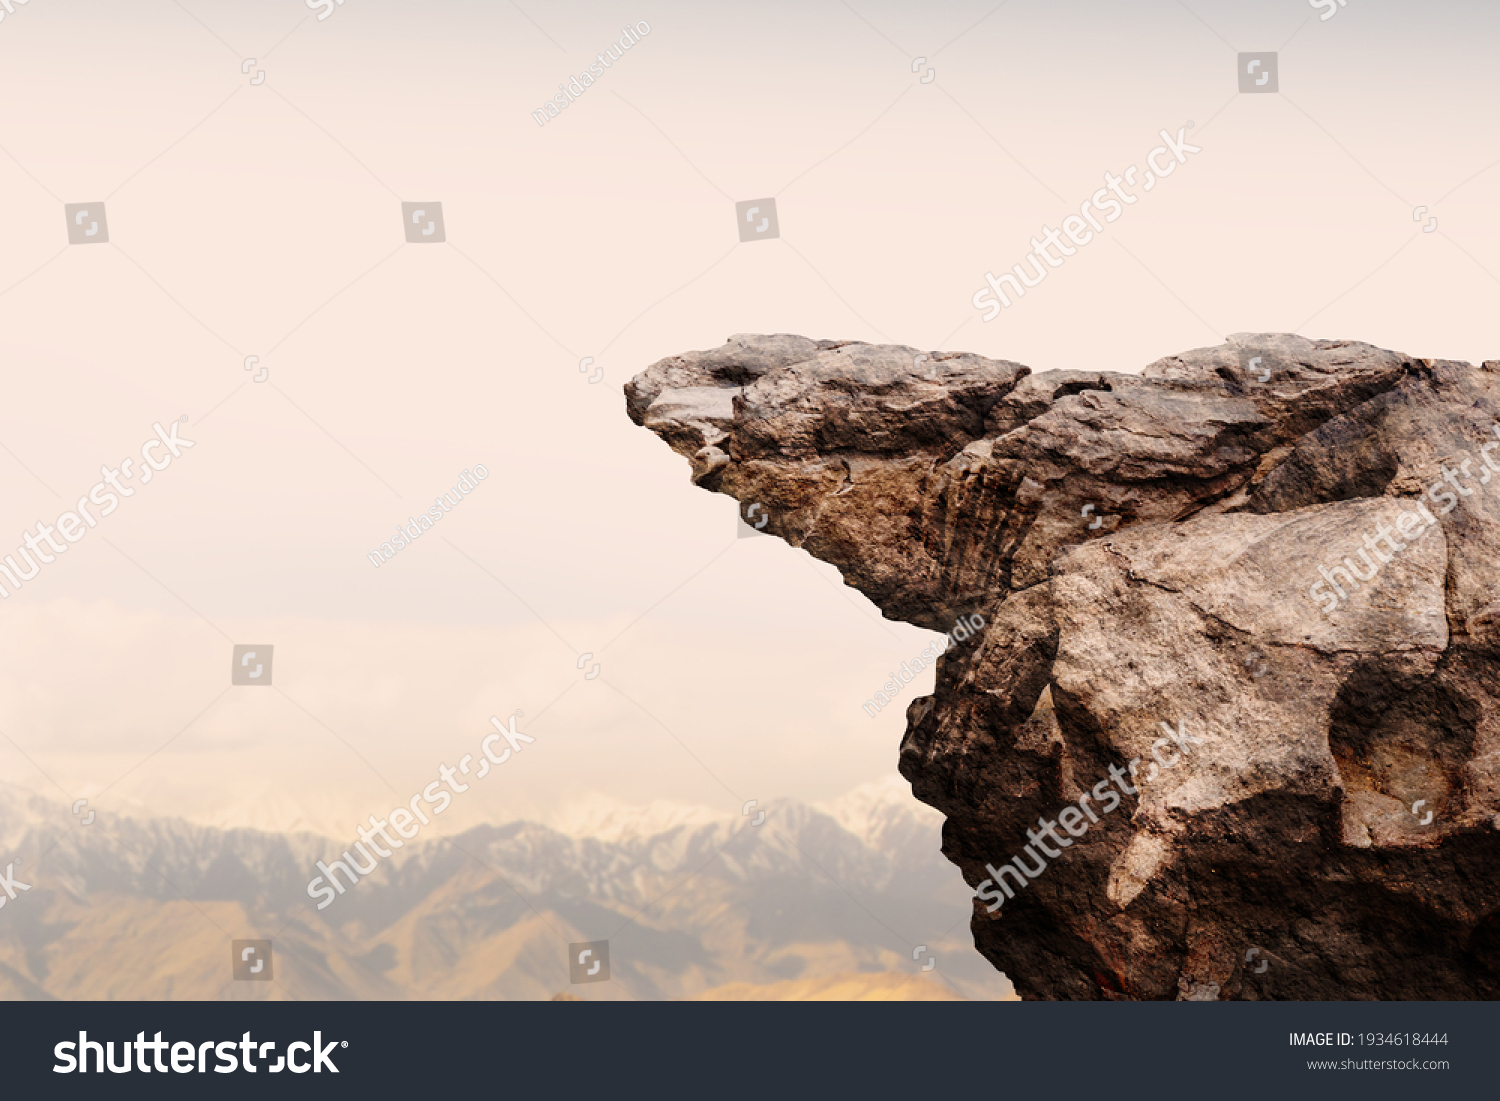 Cliff stone with mountain on clouds sky. #1934618444